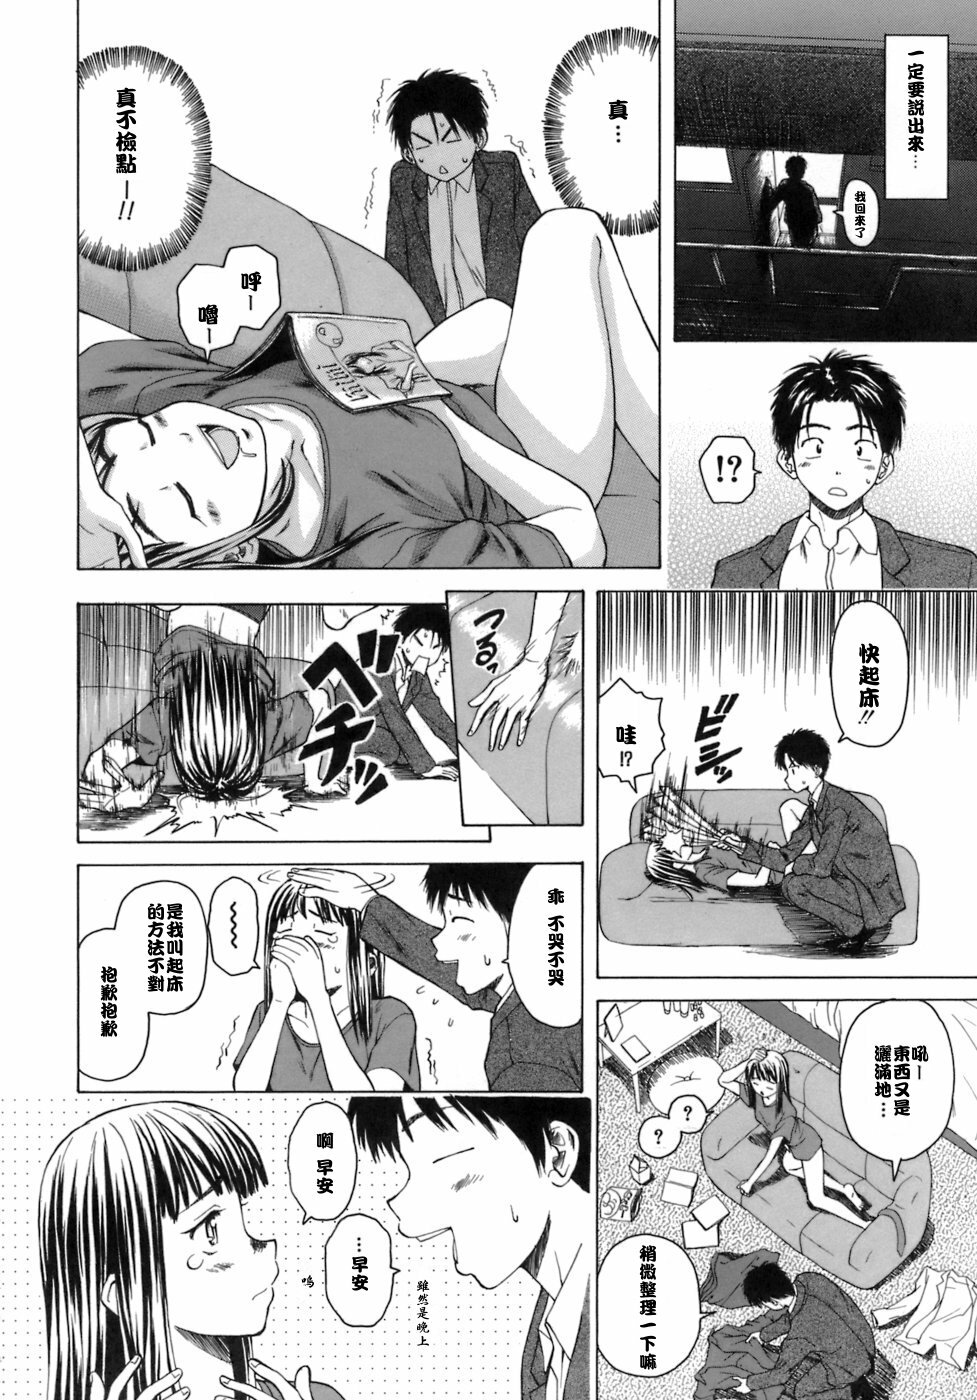 [Fuuga] Kyoushi to Seito to - Teacher and Student [Chinese] [悠月工房] page 47 full